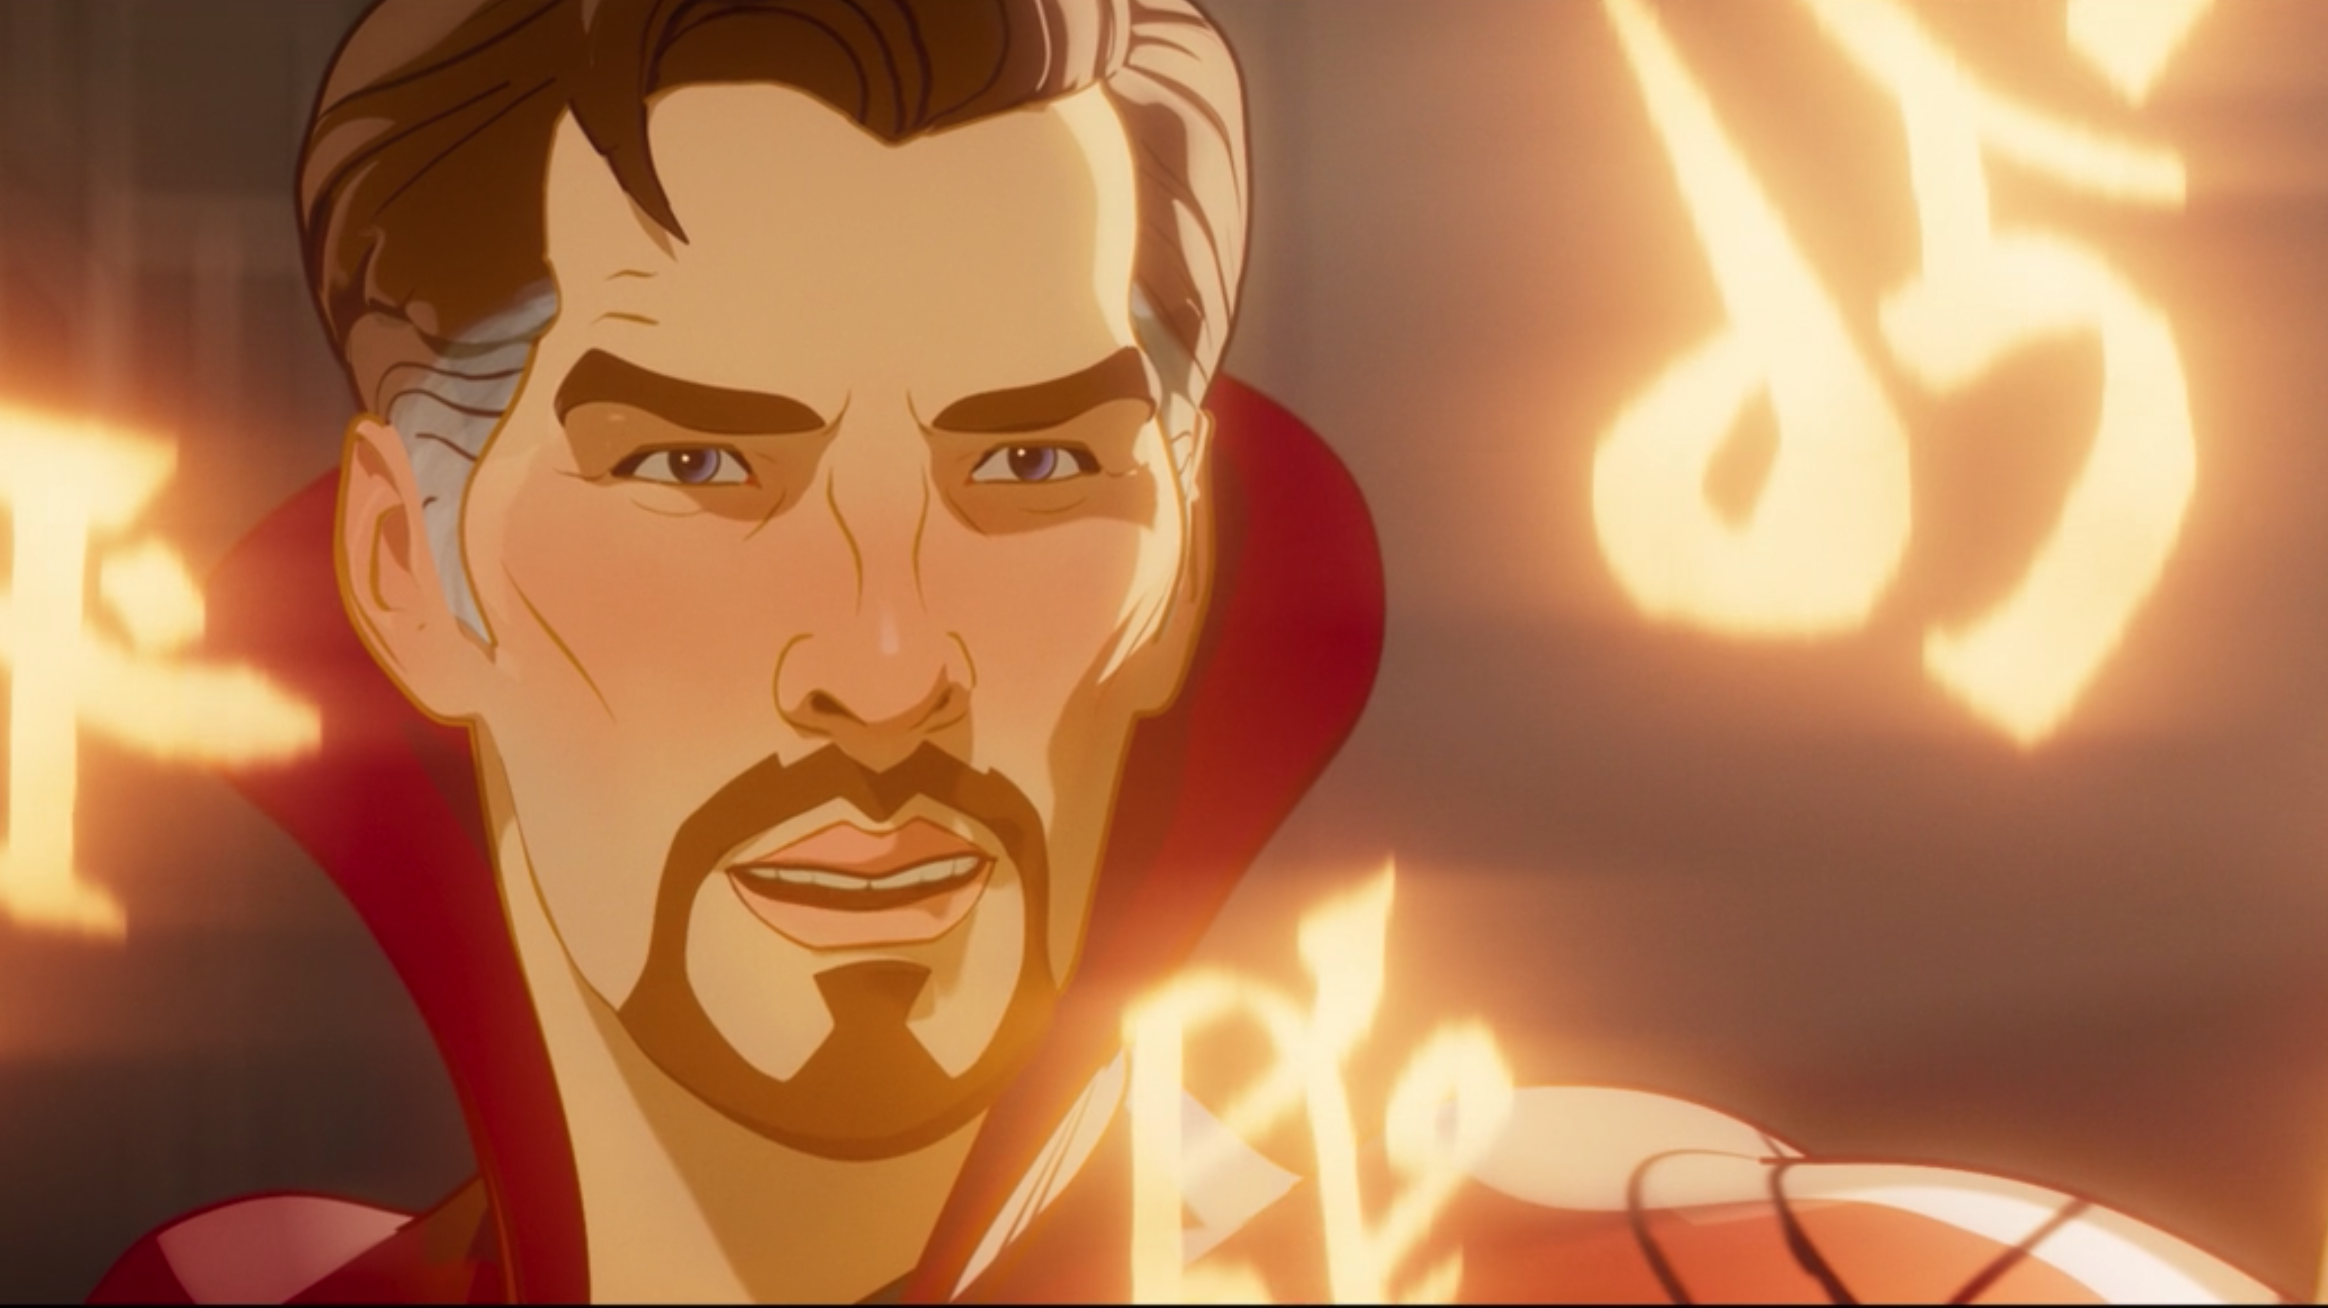 Doctor Strange 3's Most Intense Storyline Brought To Life In MCU